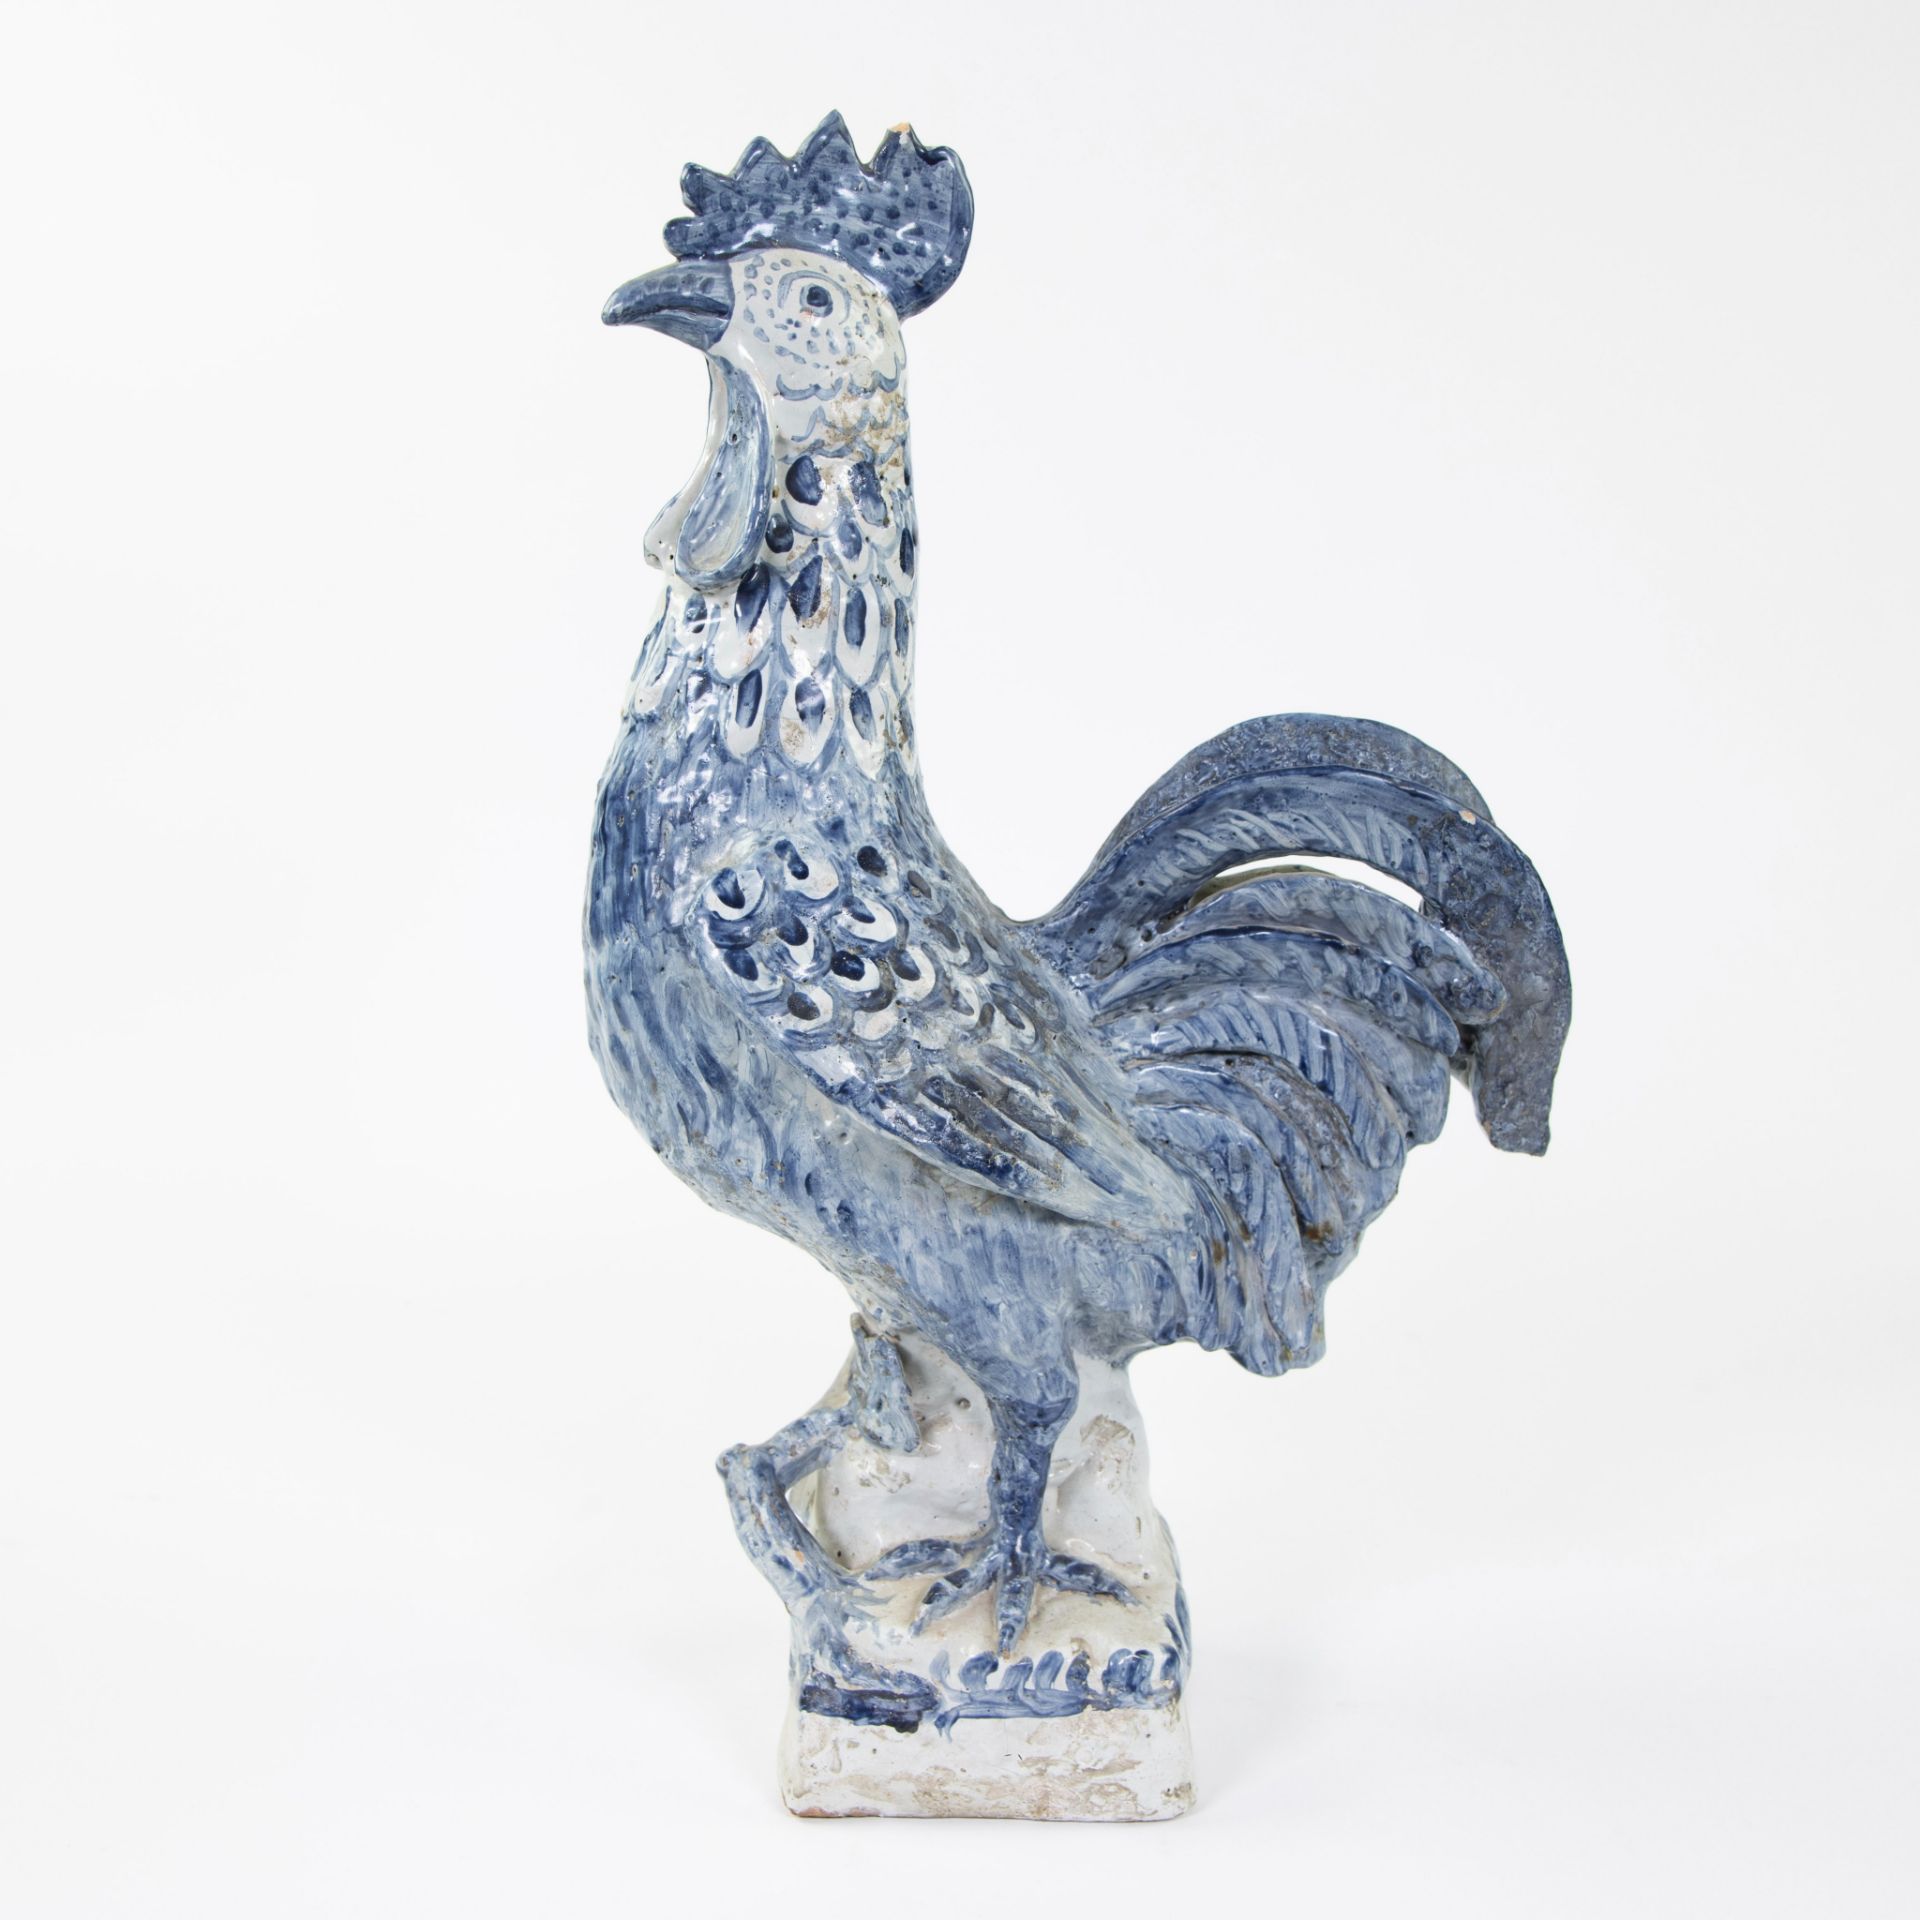 18th century hand-painted ceramic rooster, Northern French - Image 2 of 6